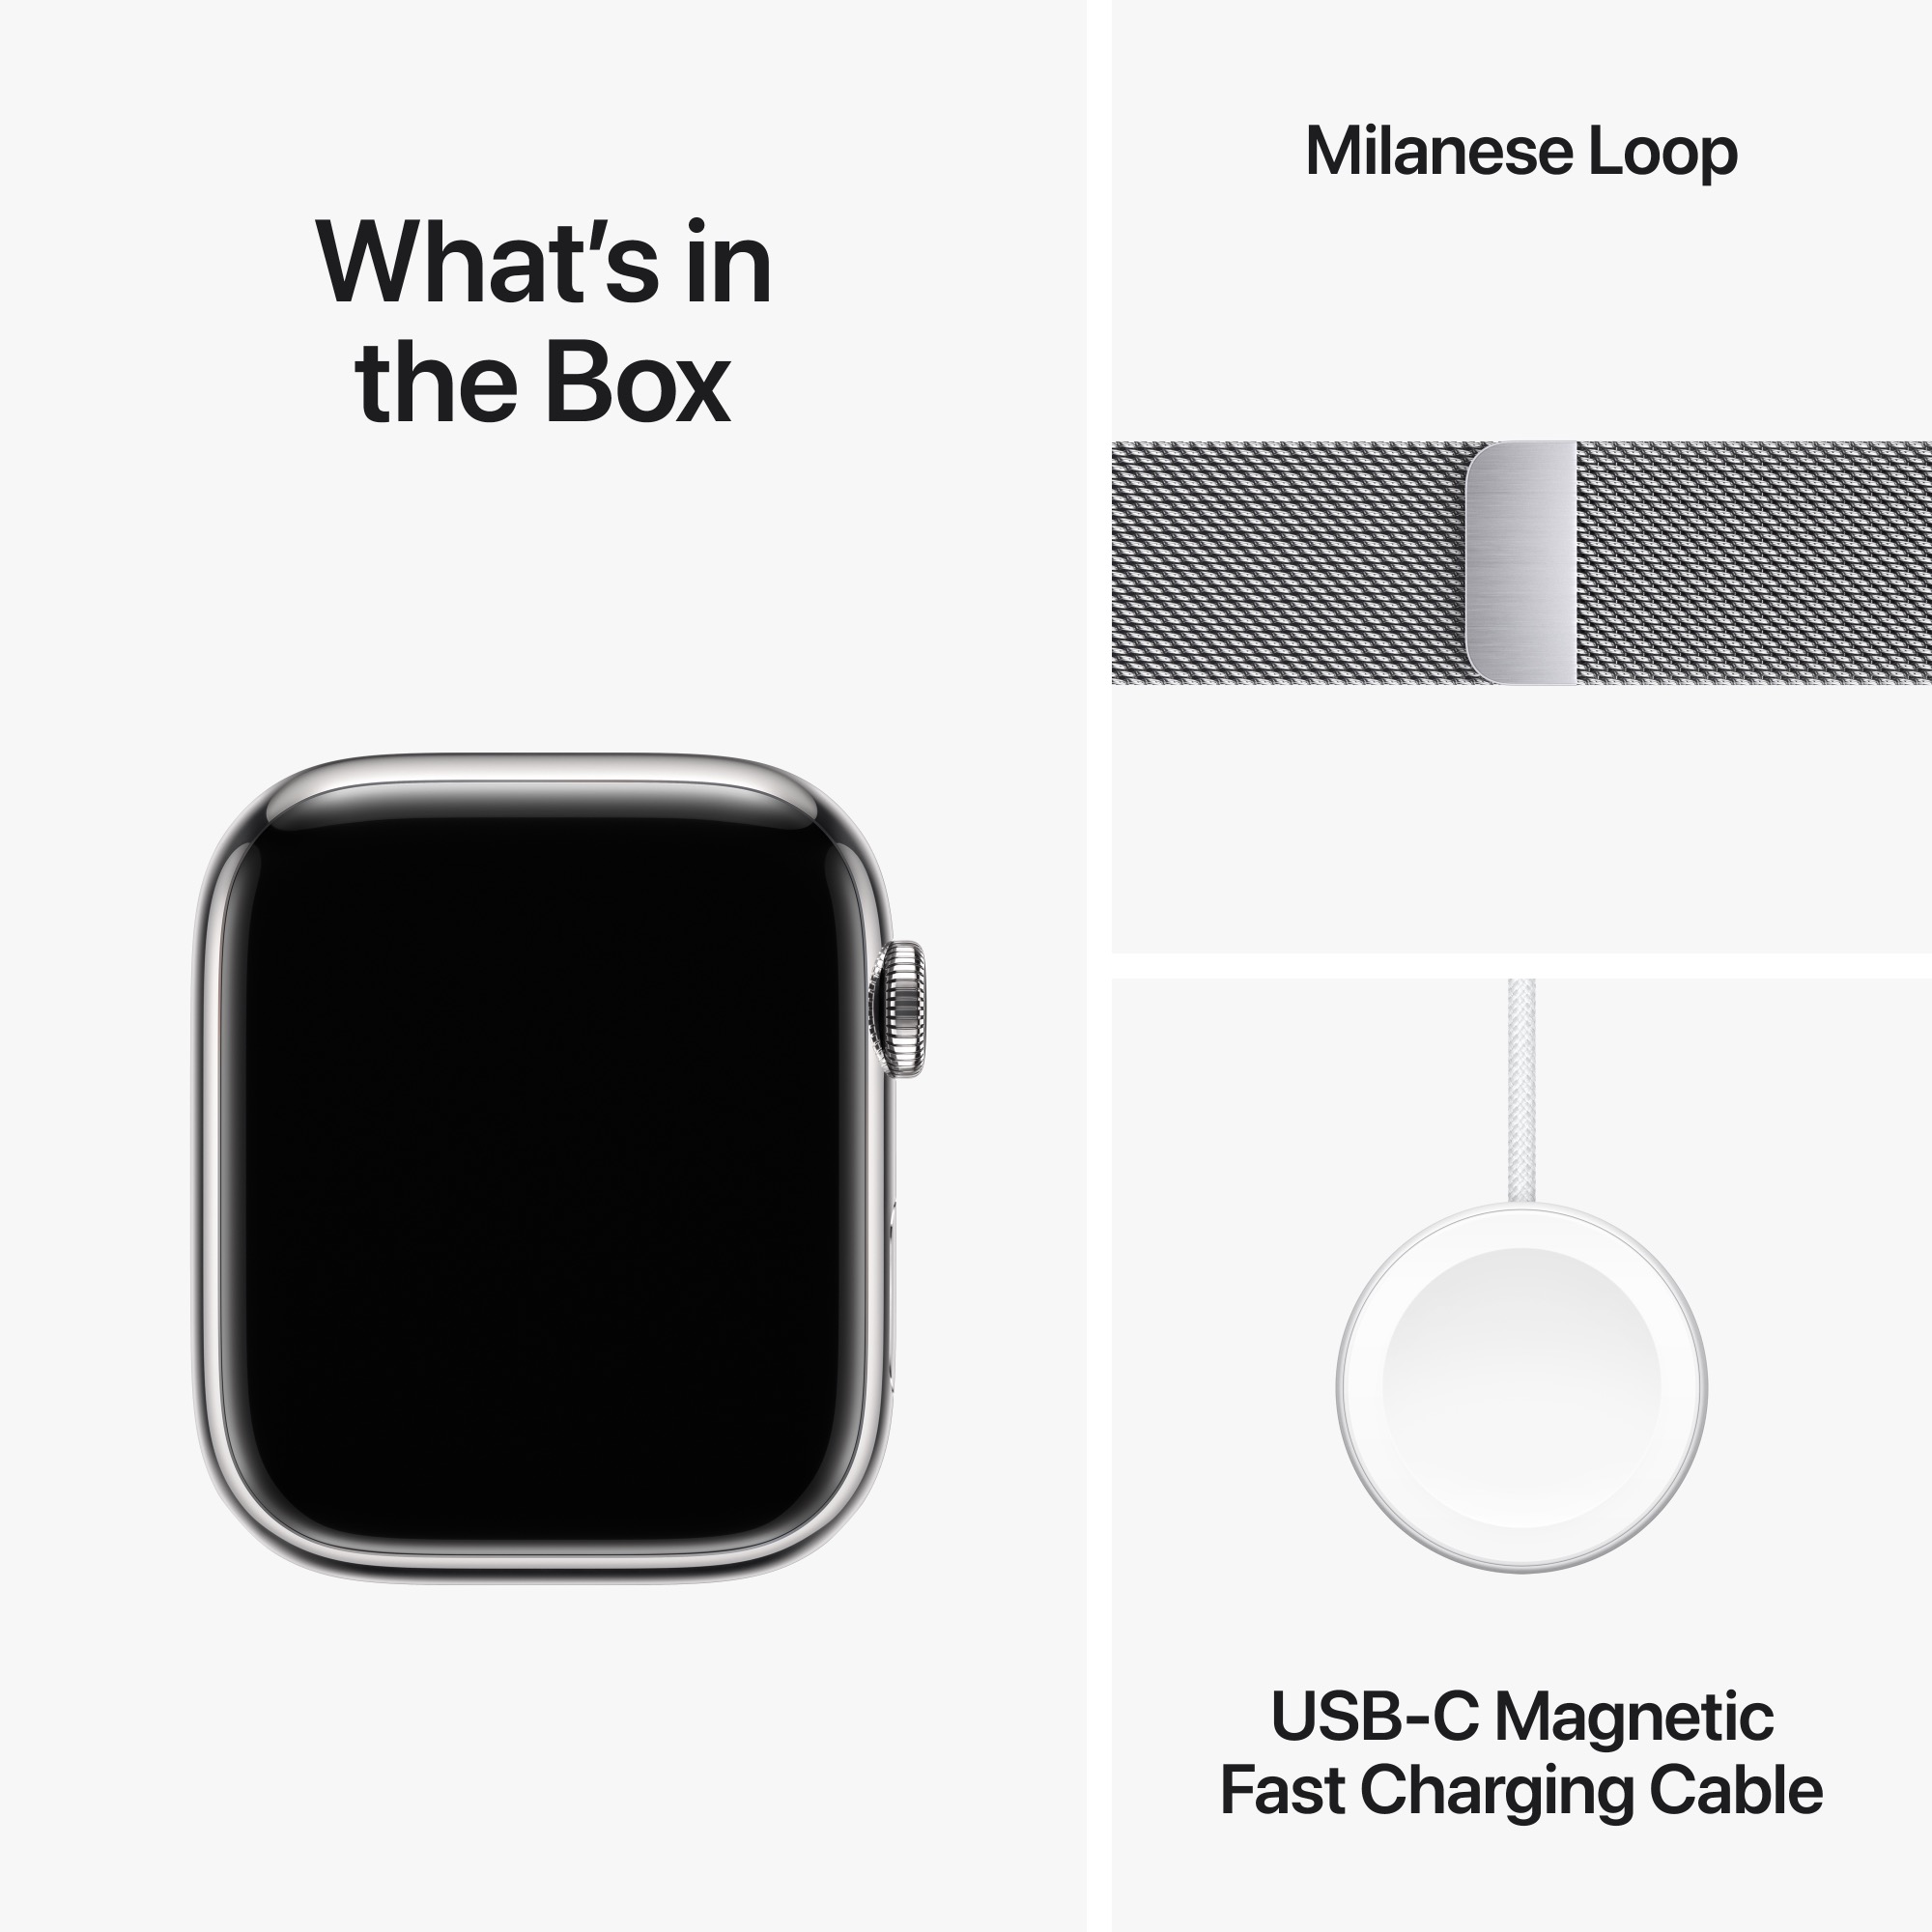 APPLE Watch Series 9 GPS + Cellular Stainless Steel Case with Milanese Loop